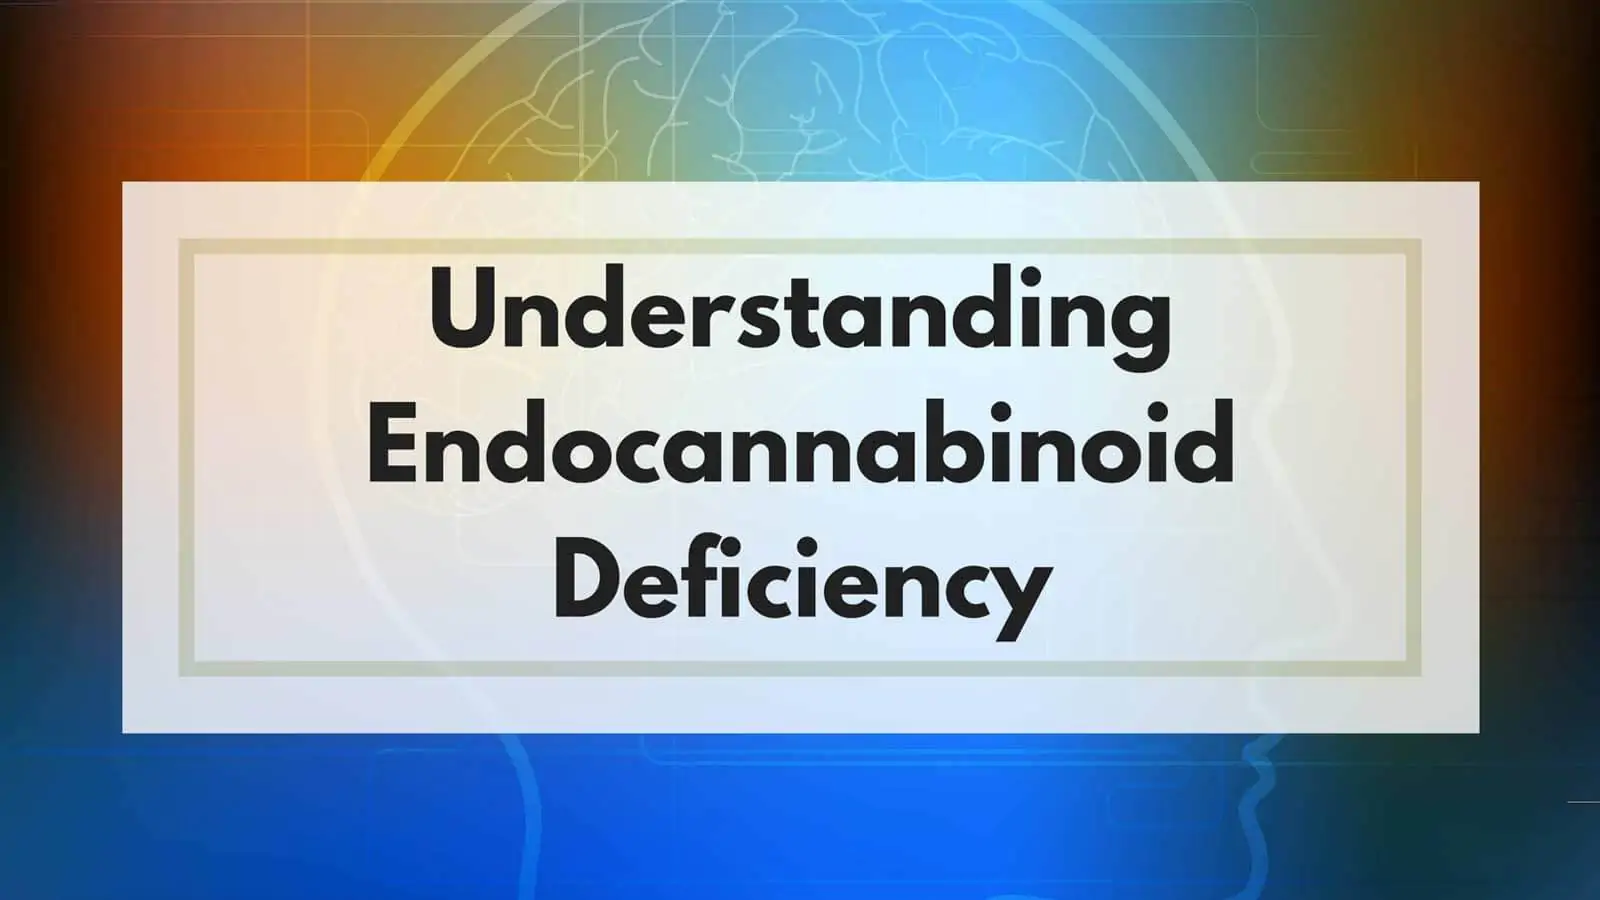 How To Tell if You Have an Endocannabinoid Deficiency